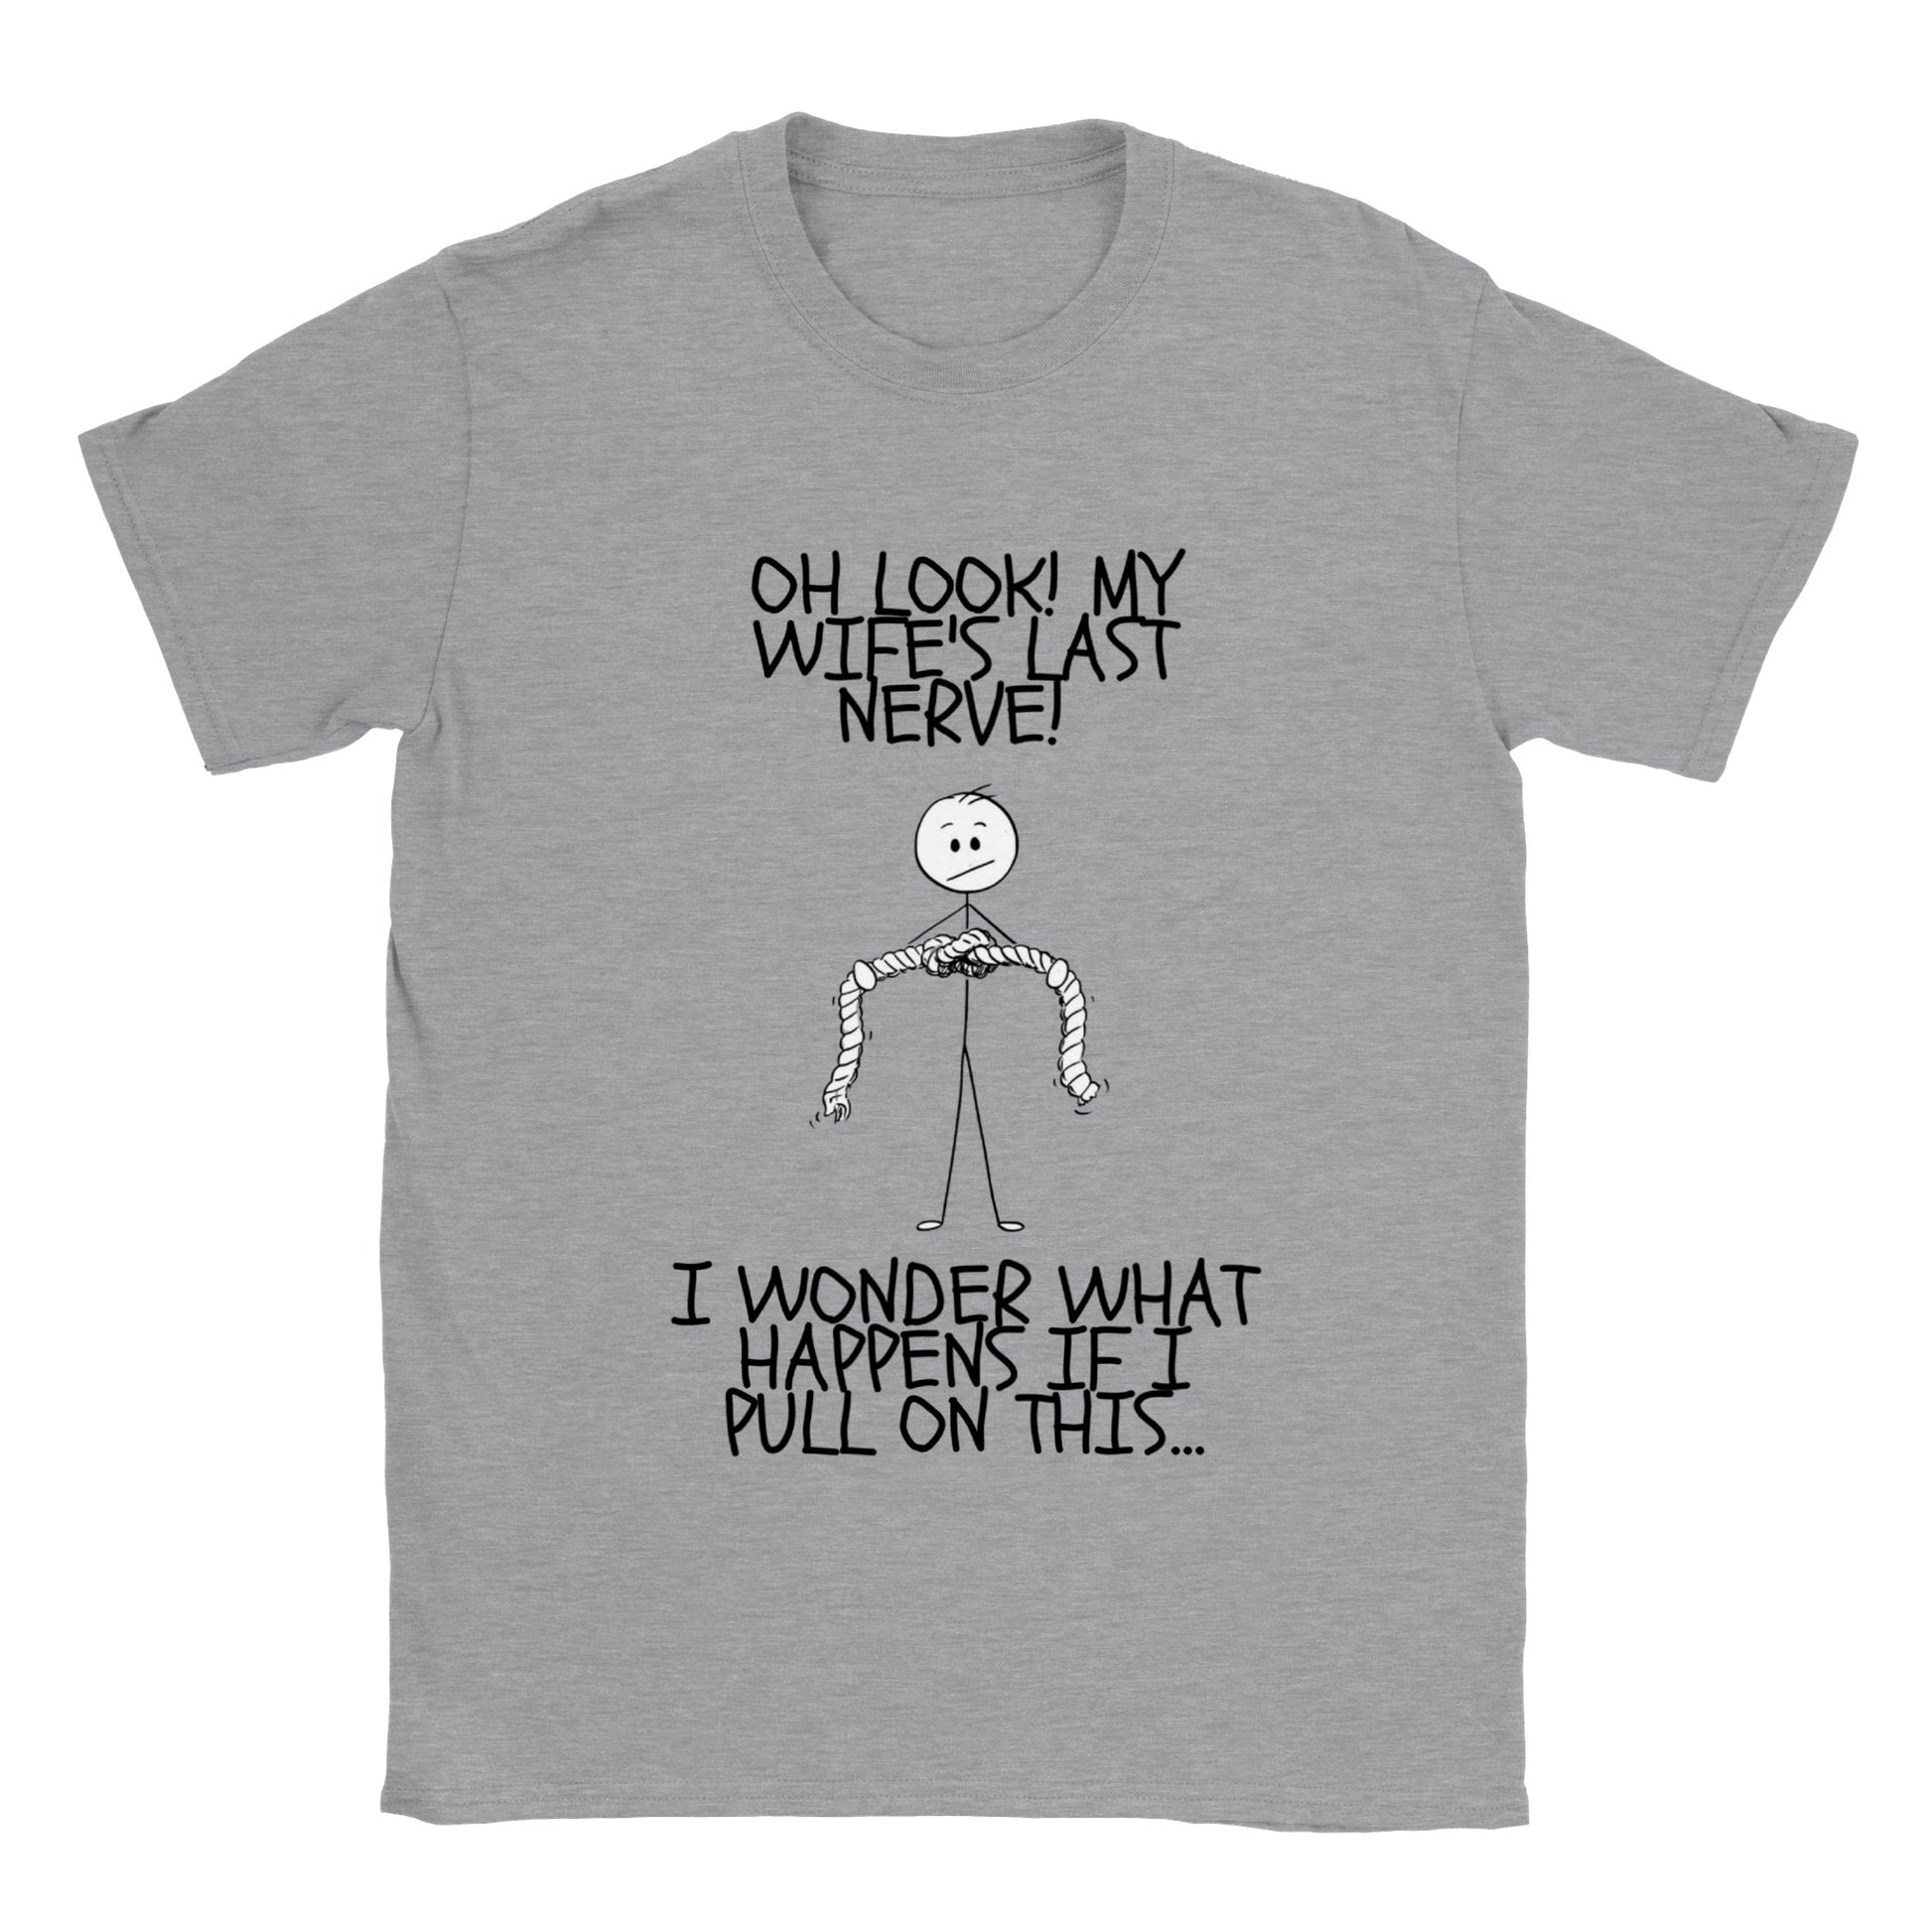 Oh Look!  My Wife's Last Nerve...  Classic Unisex Crewneck T-shirt - Mister Snarky's